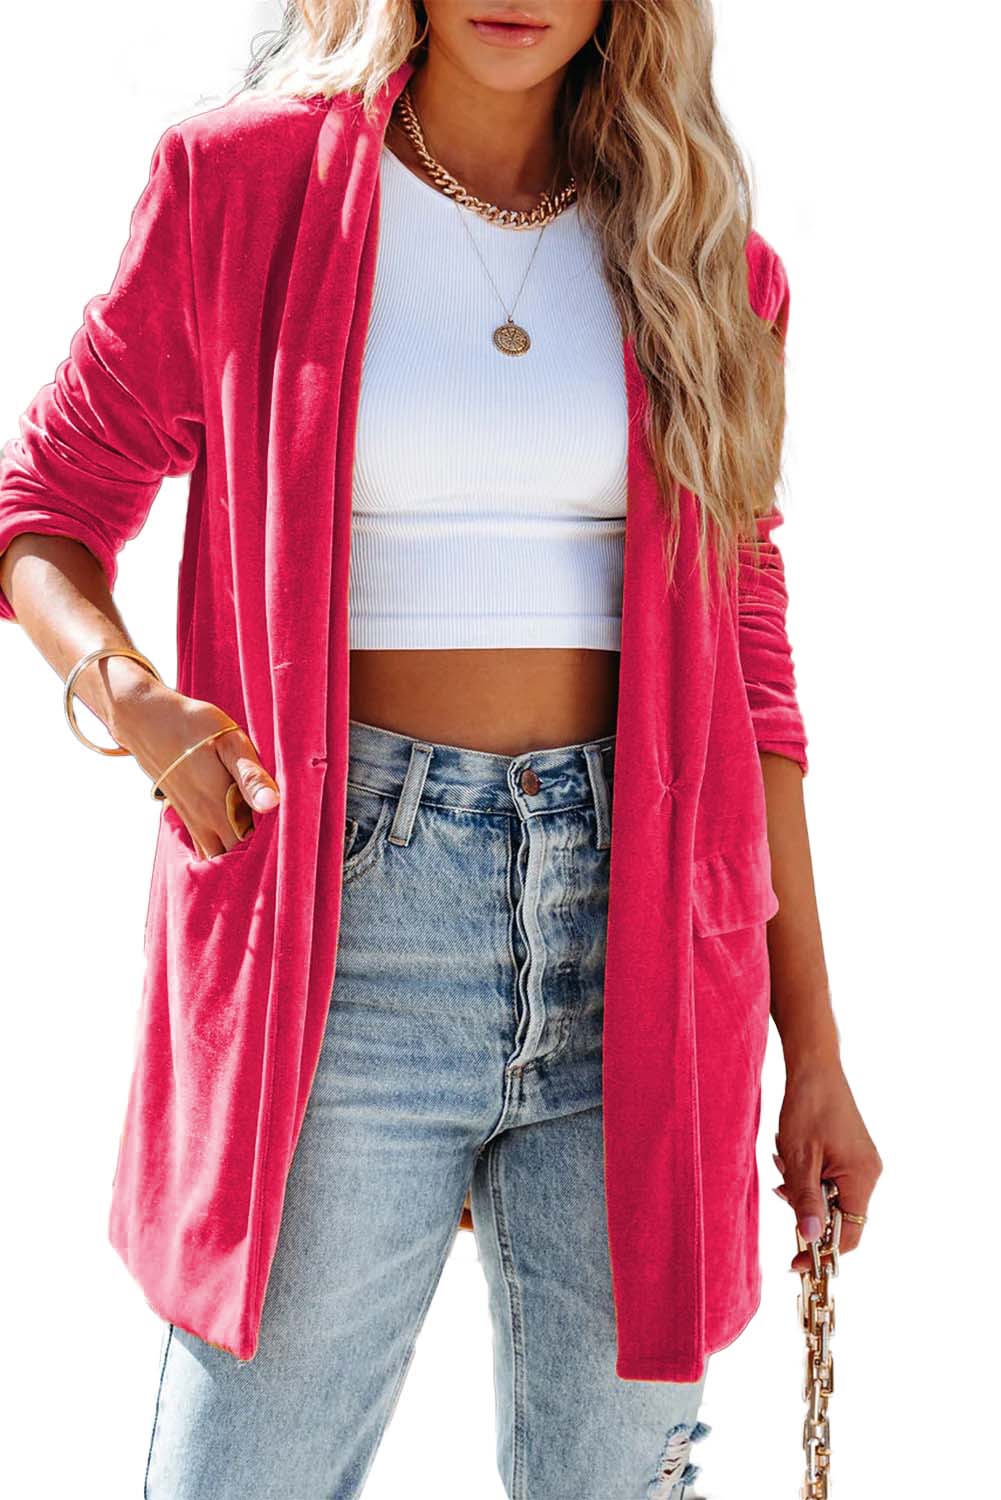 LC852449-6-S, LC852449-6-M, LC852449-6-L, LC852449-6-XL, Rose Women Velvet Blazer Jacket Relaxed fit Casual Outerwear